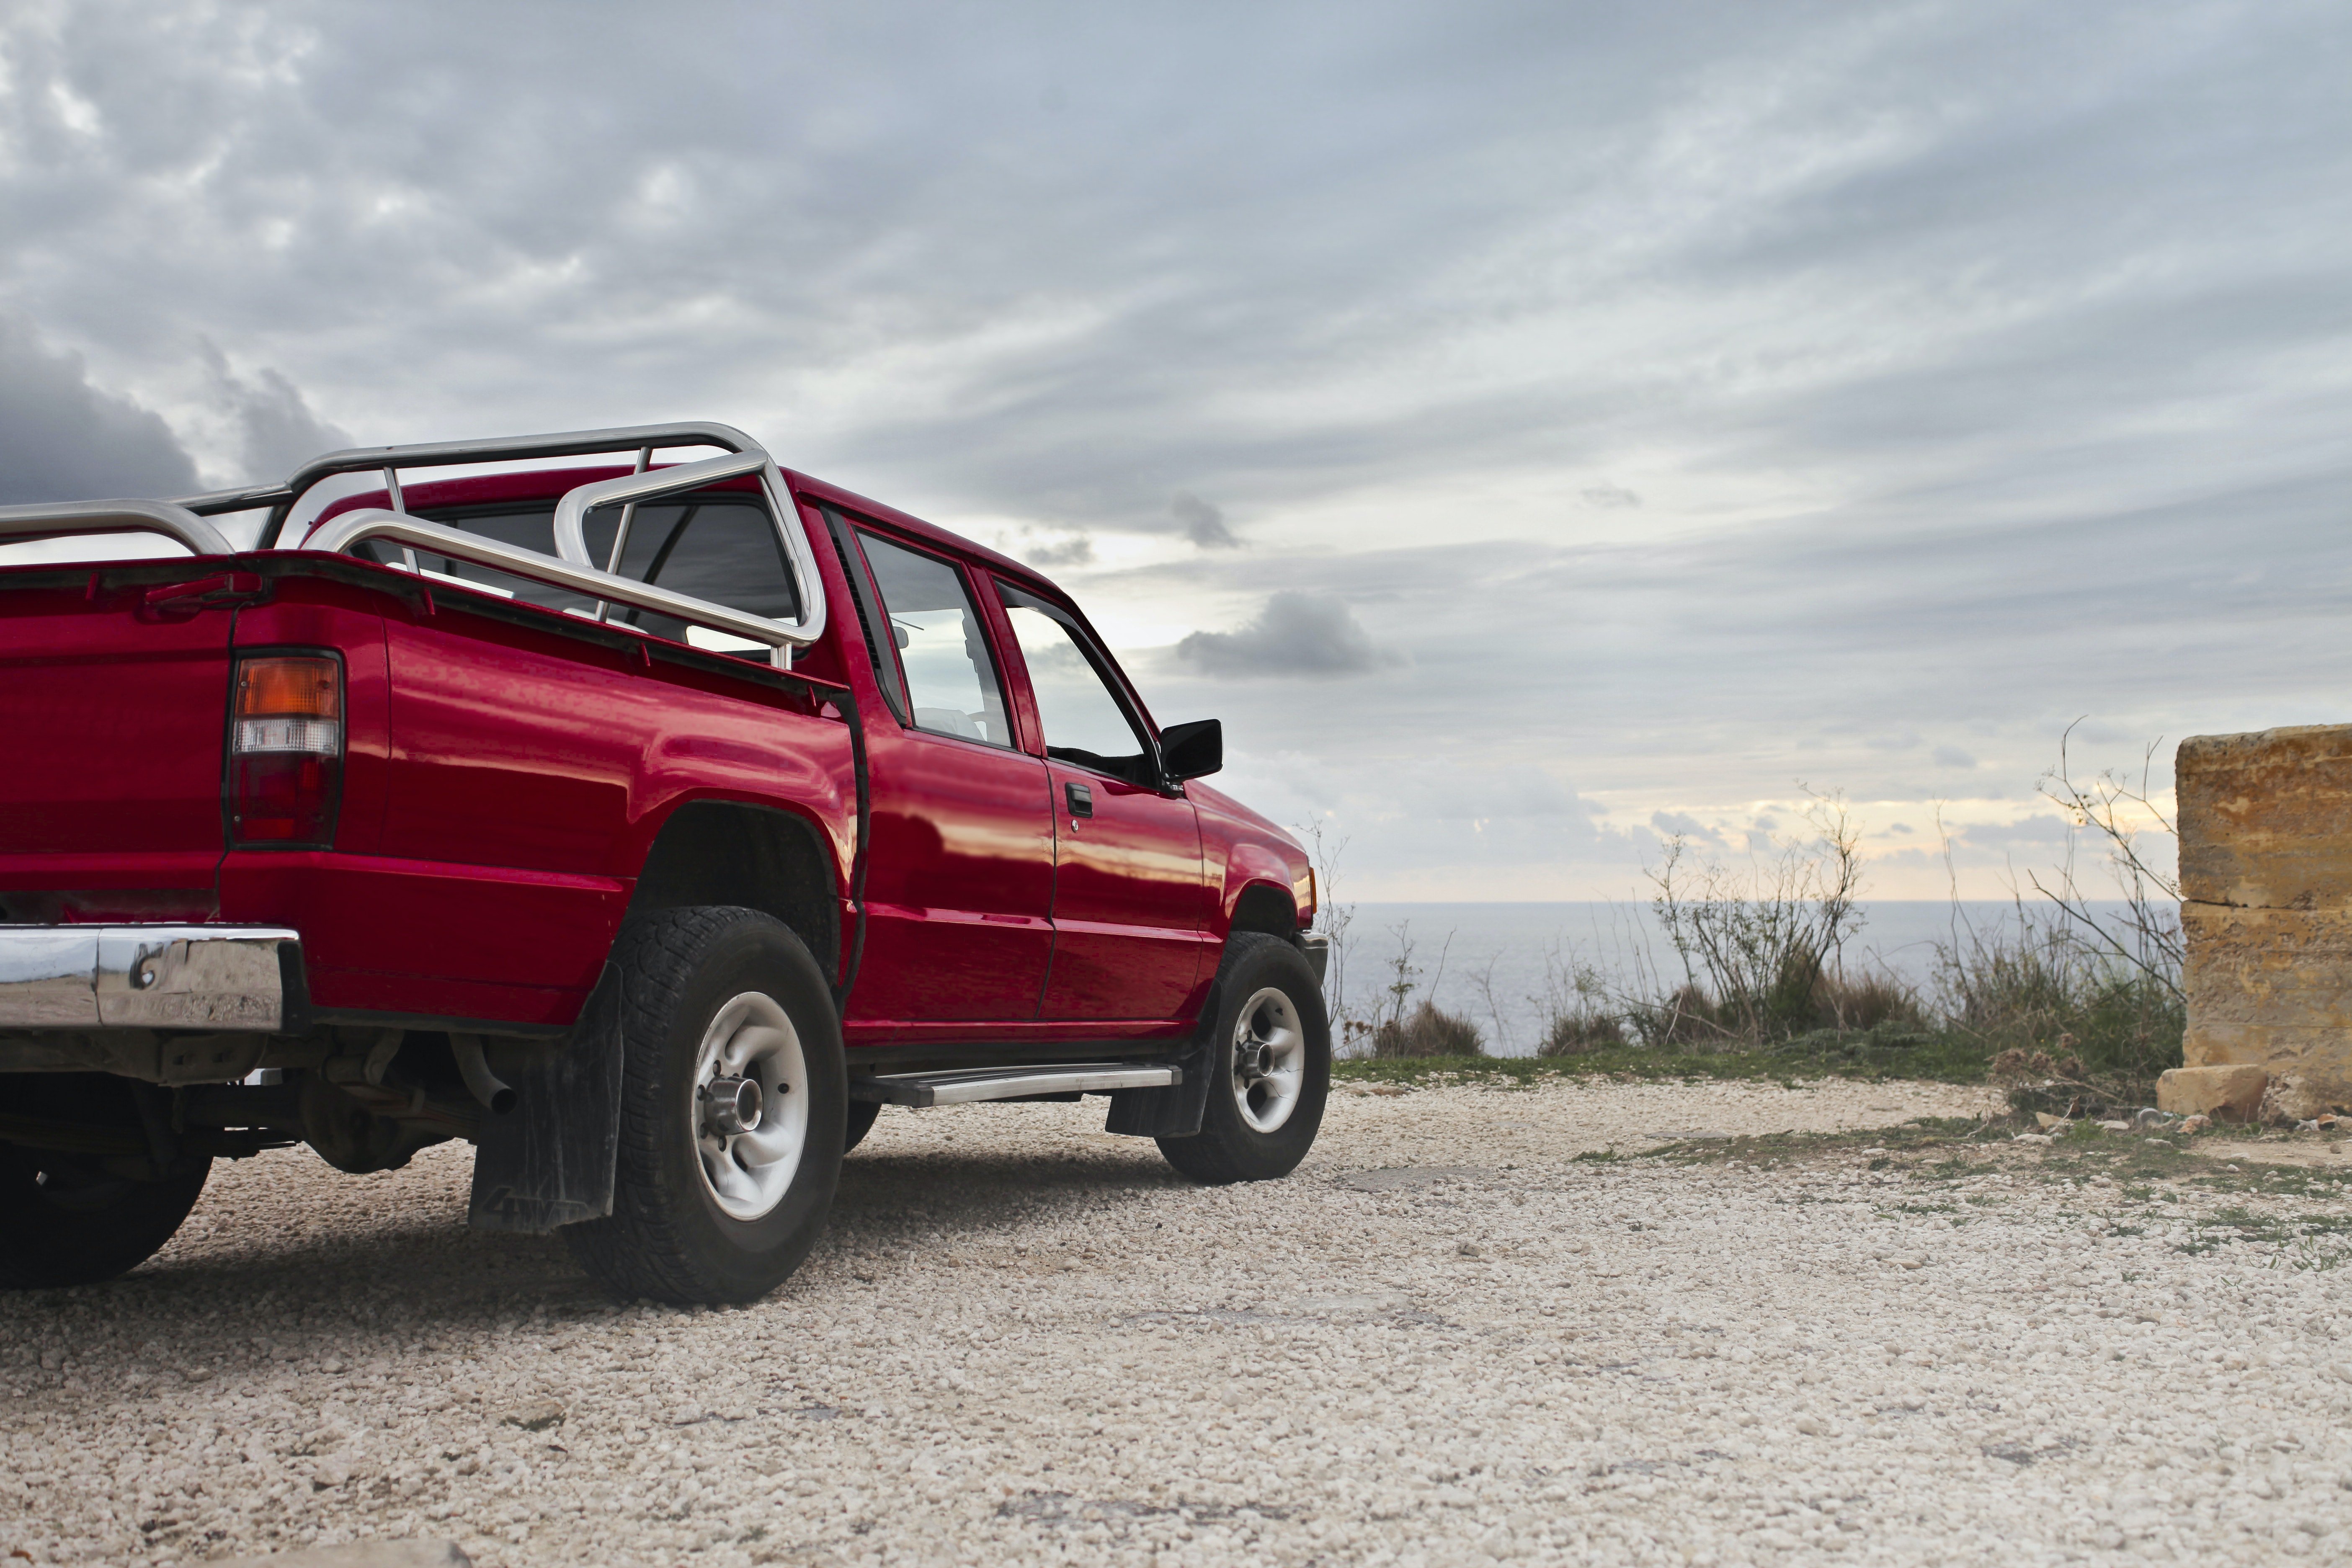 A red pick-up truck parked by the side of the road | Source: Pexels